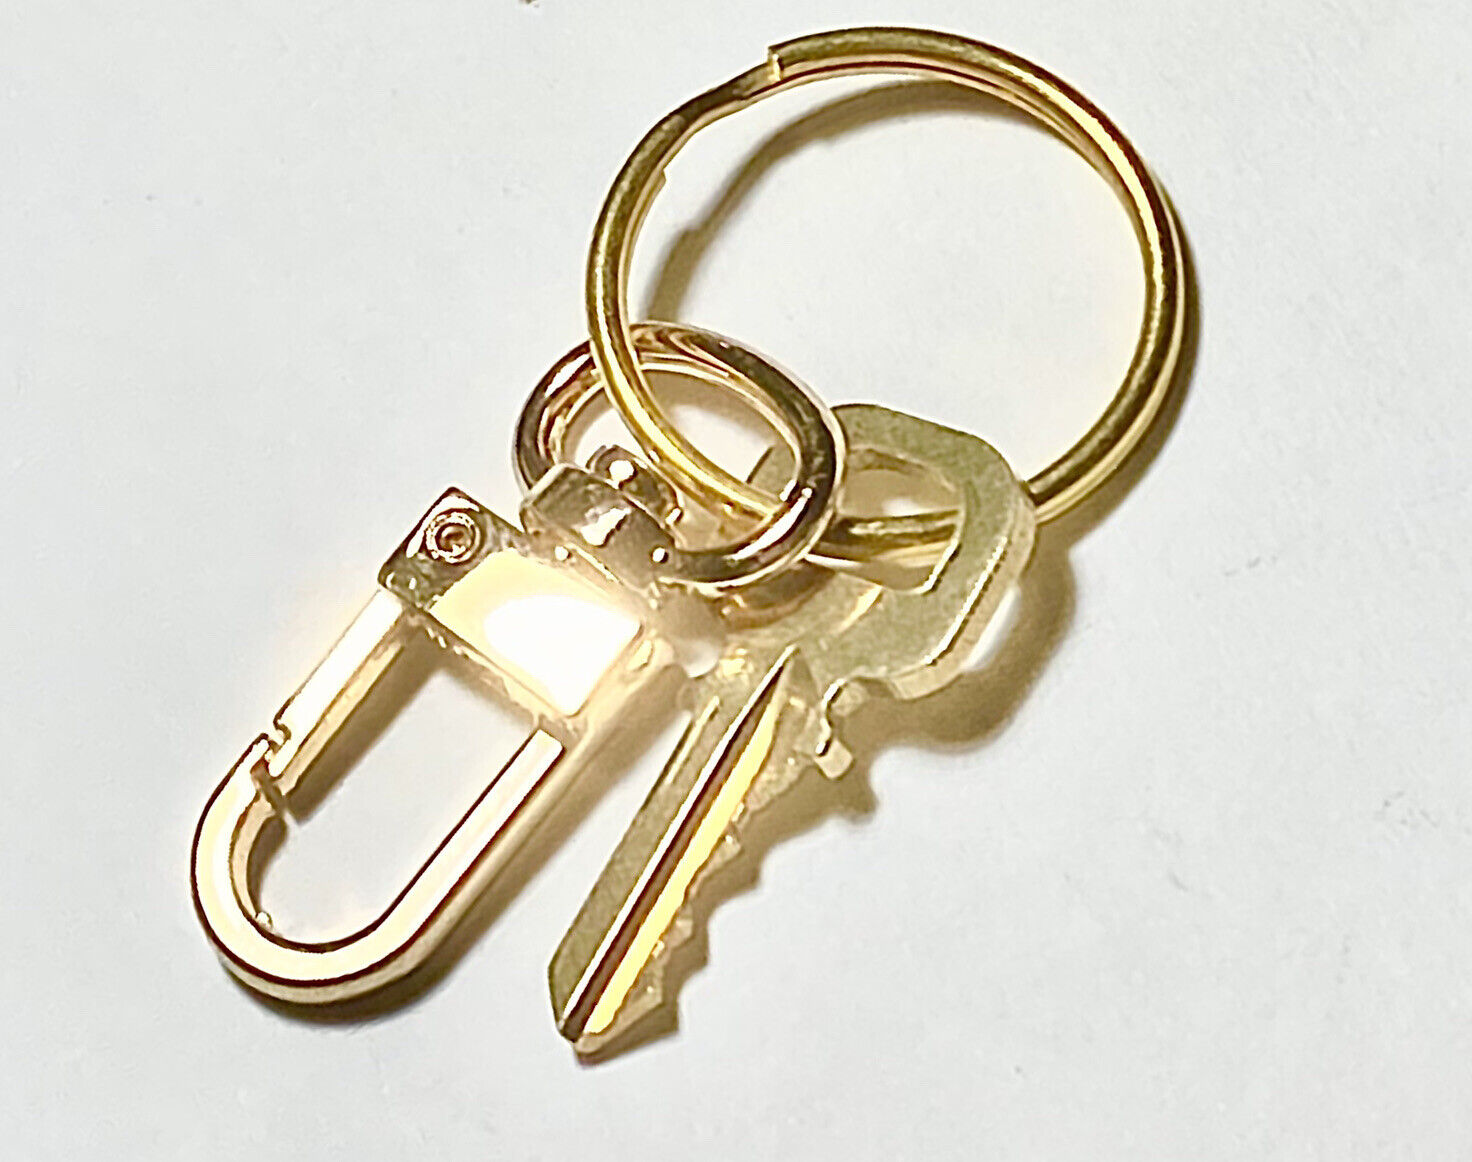 Louis Vuitton Key # 317 Polished Brass - For Authentic LV Lock only No. 317